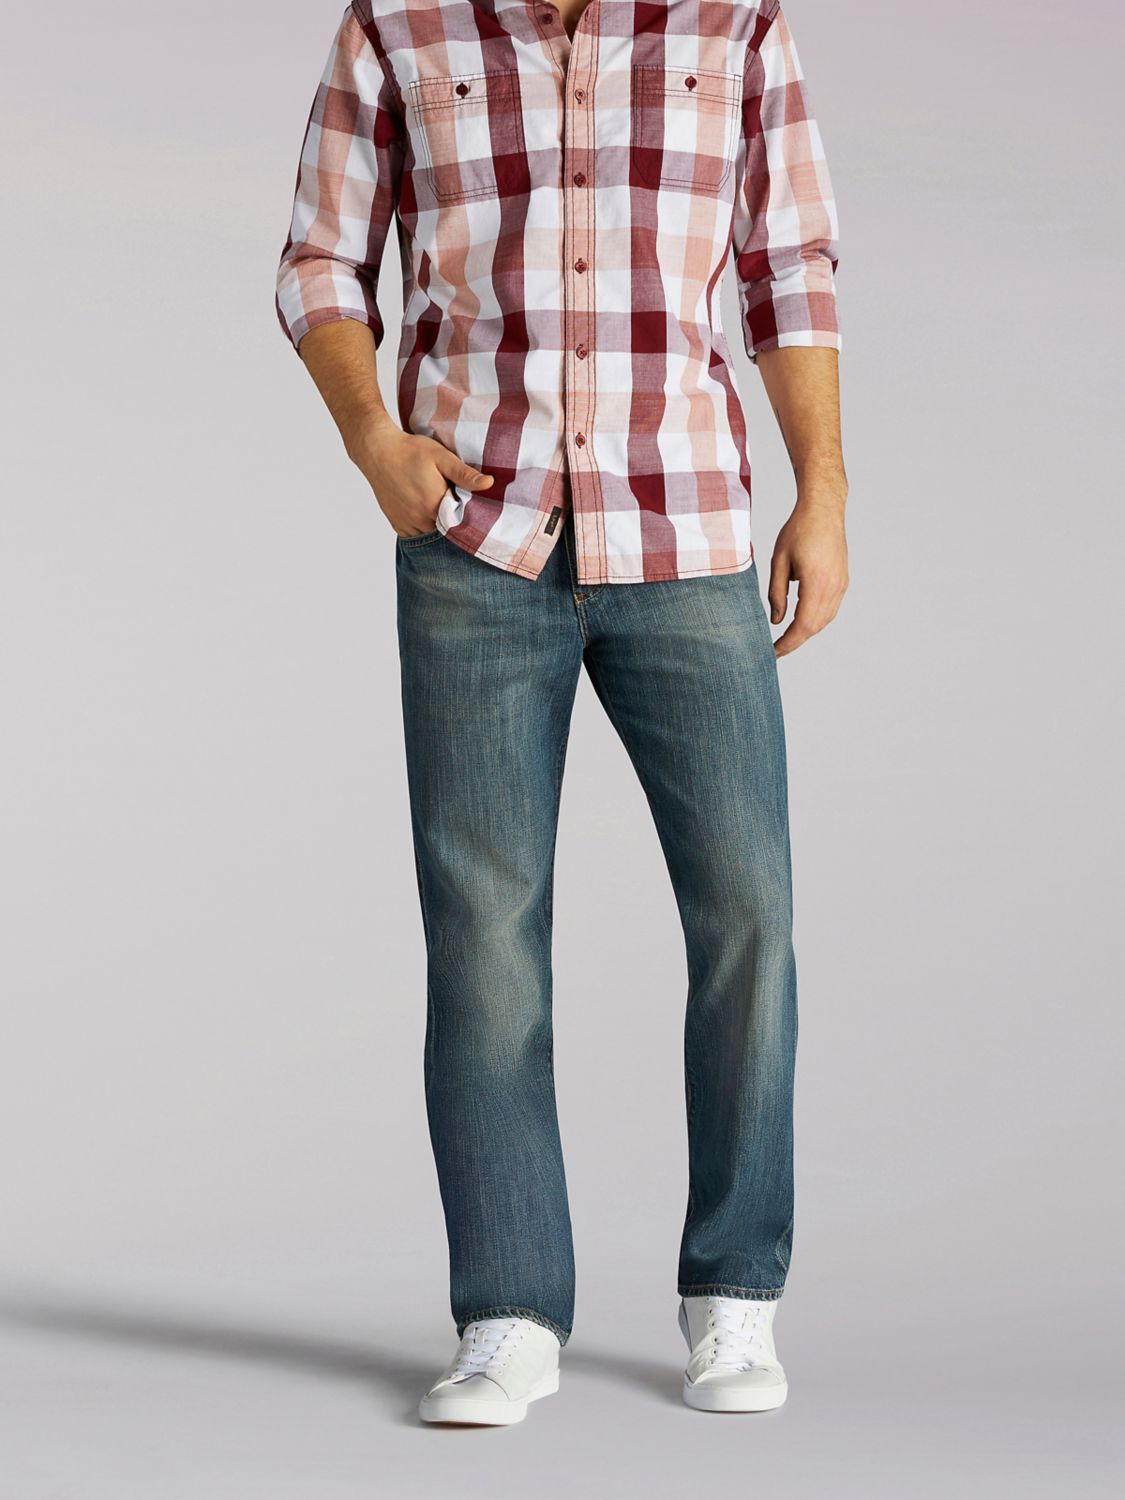 Modern Series Straight Leg Jean in Captain from Front View